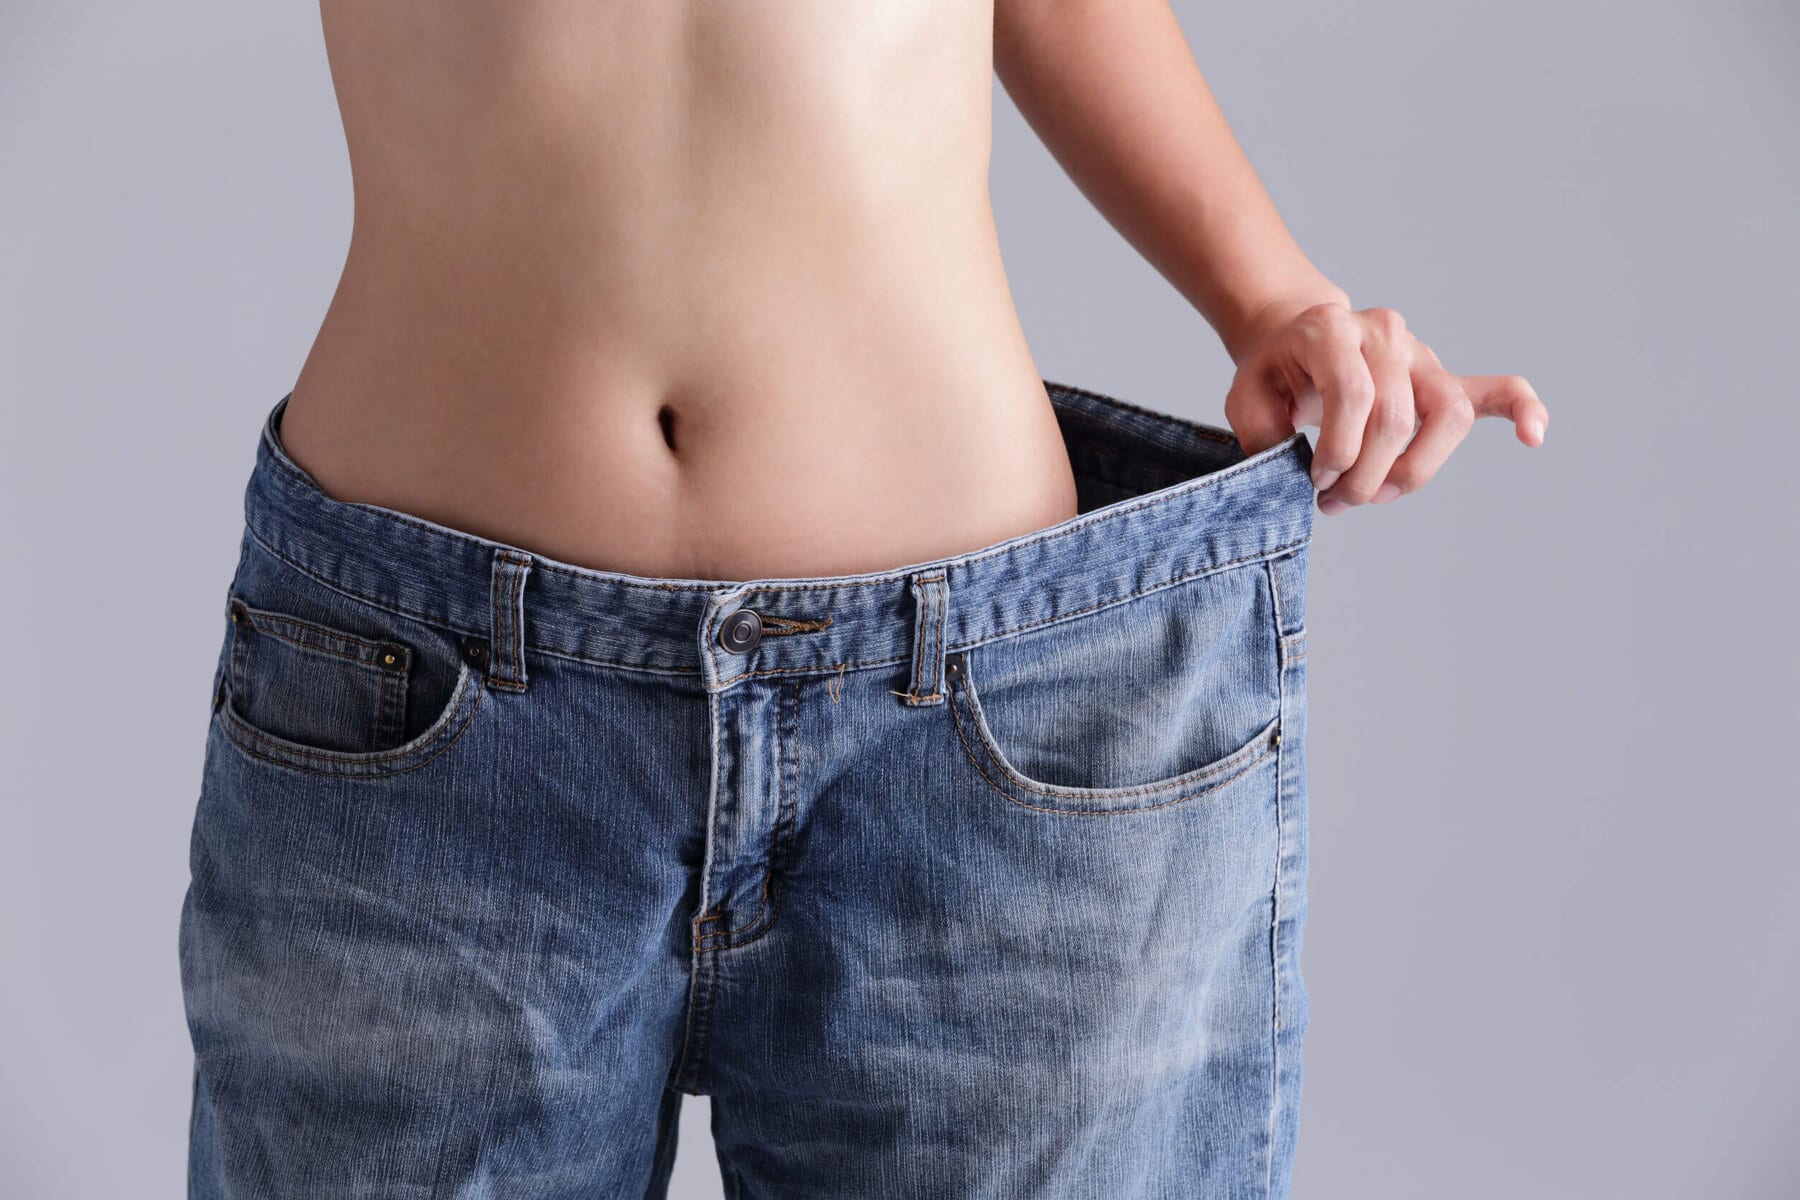 Bariatric or Weight Loss Surgery in Fountain Valley, CA - The Weight Loss Surgery Center Of Los Angeles